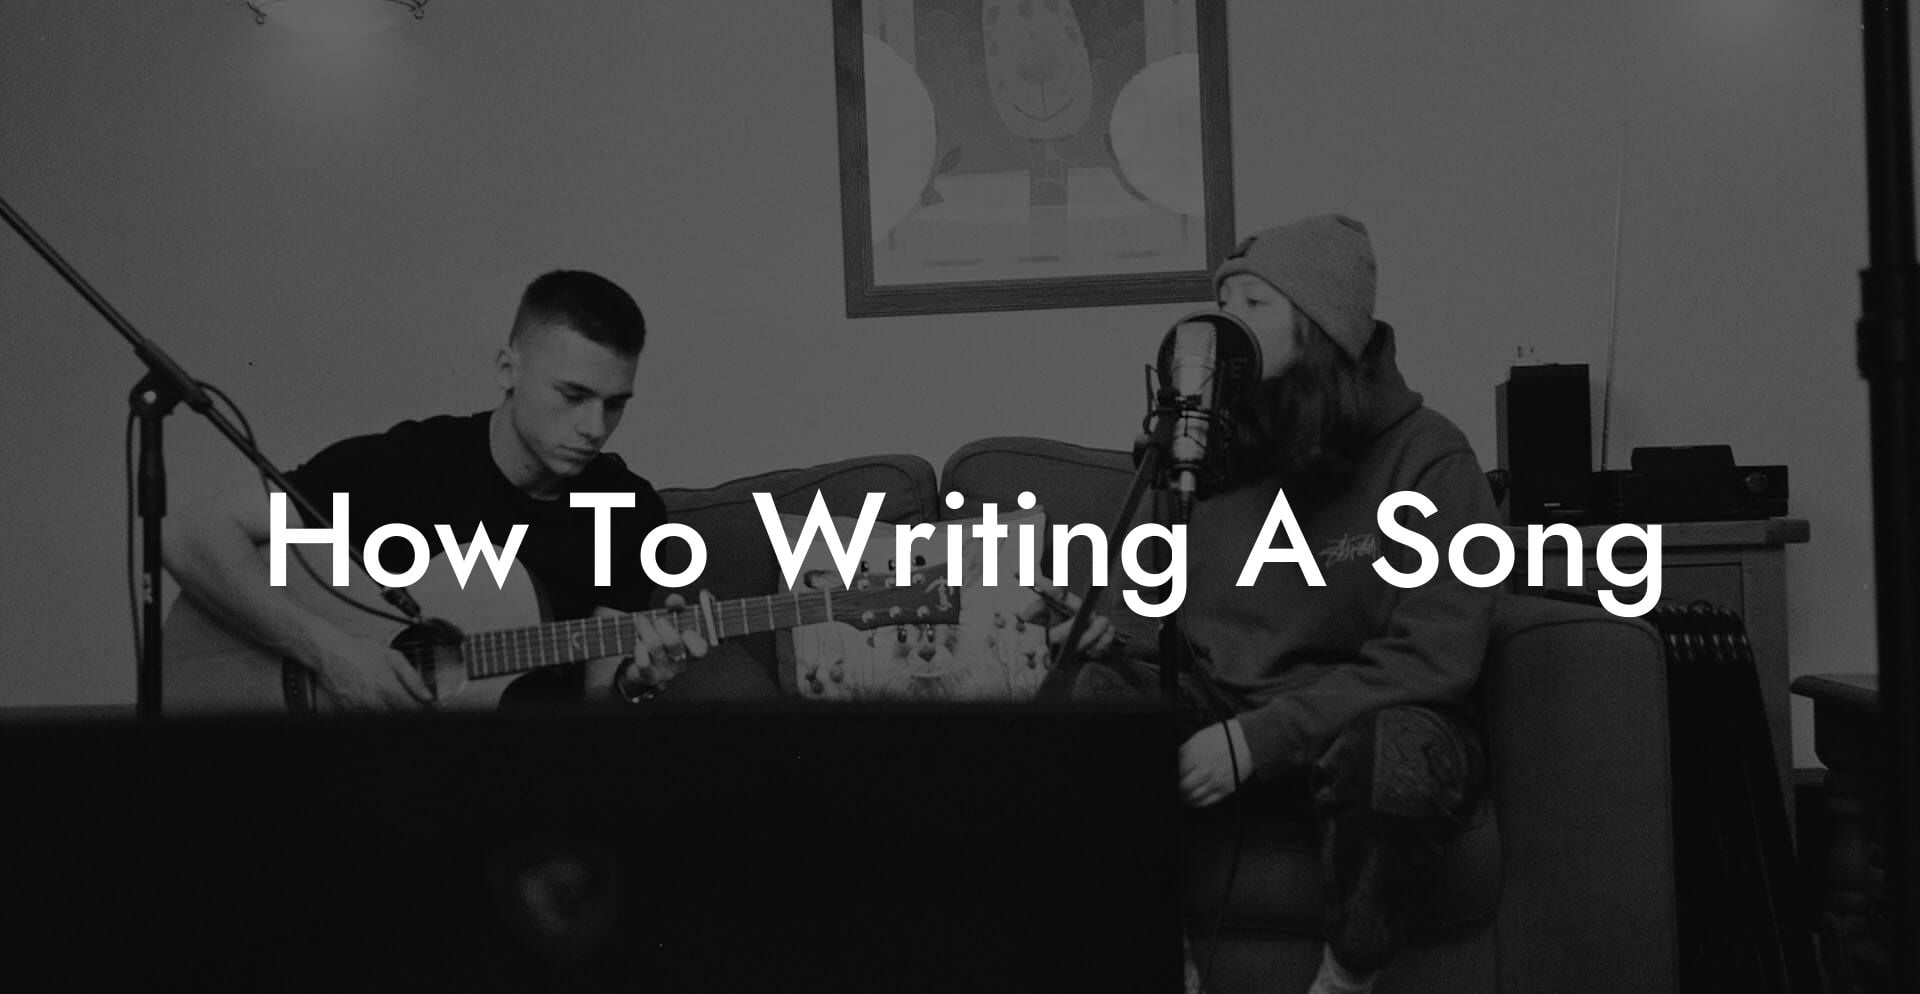 how to writing a song lyric assistant